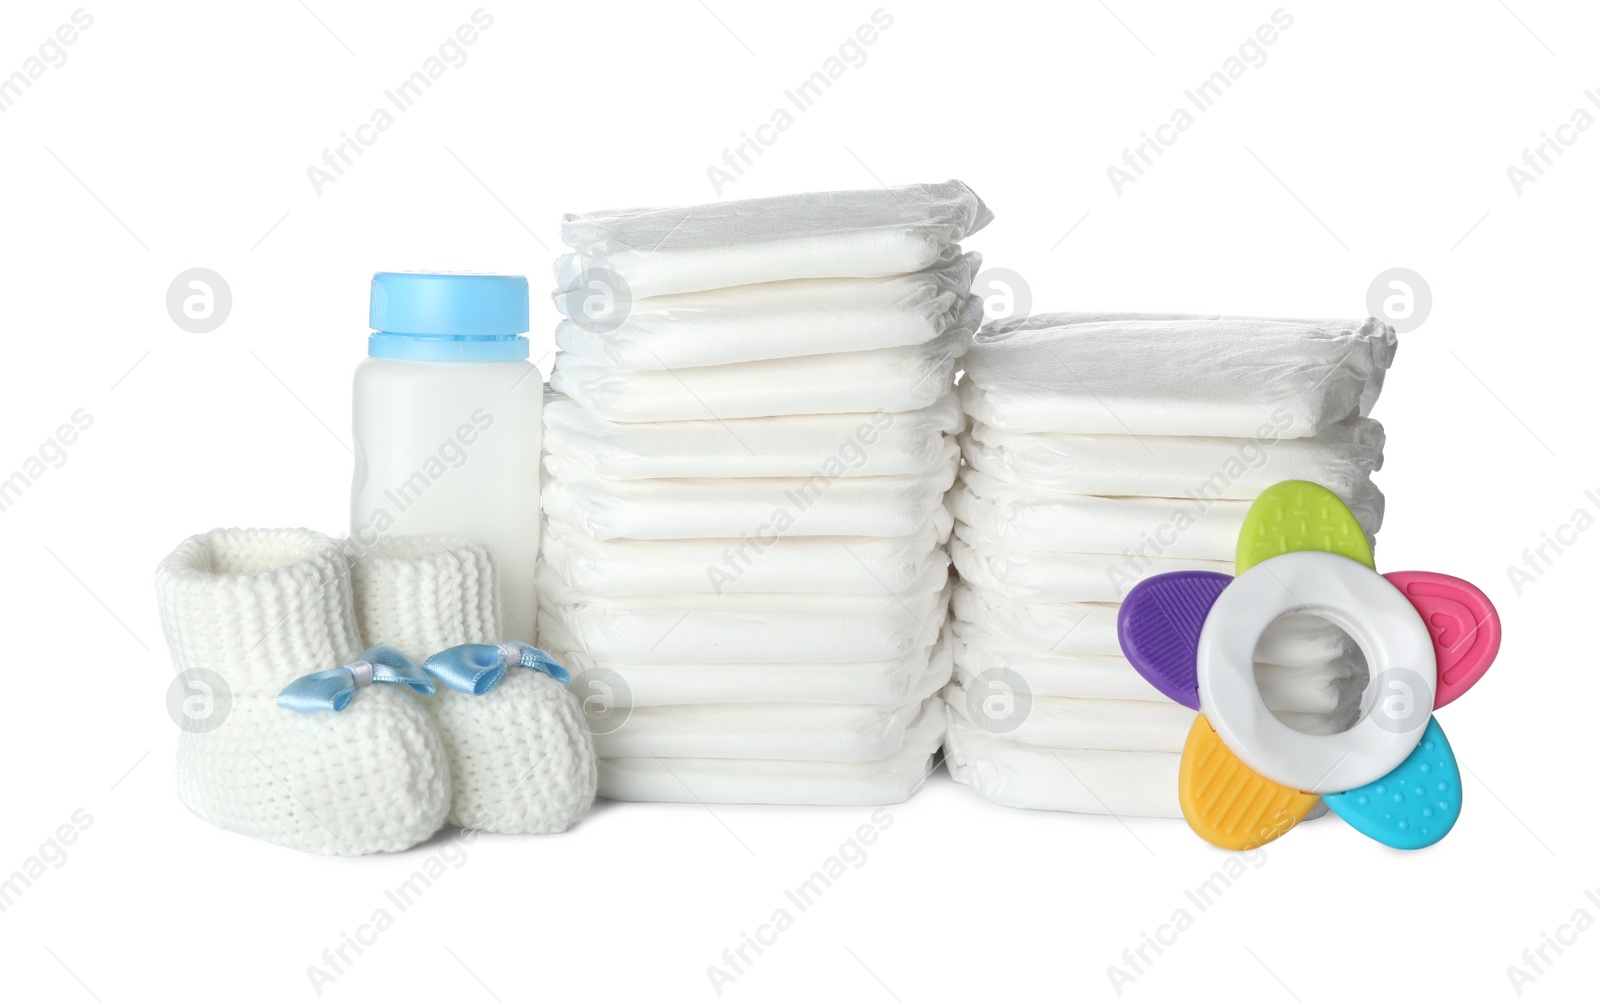 Photo of Disposable diapers, child's booties, teether and bottle on white background